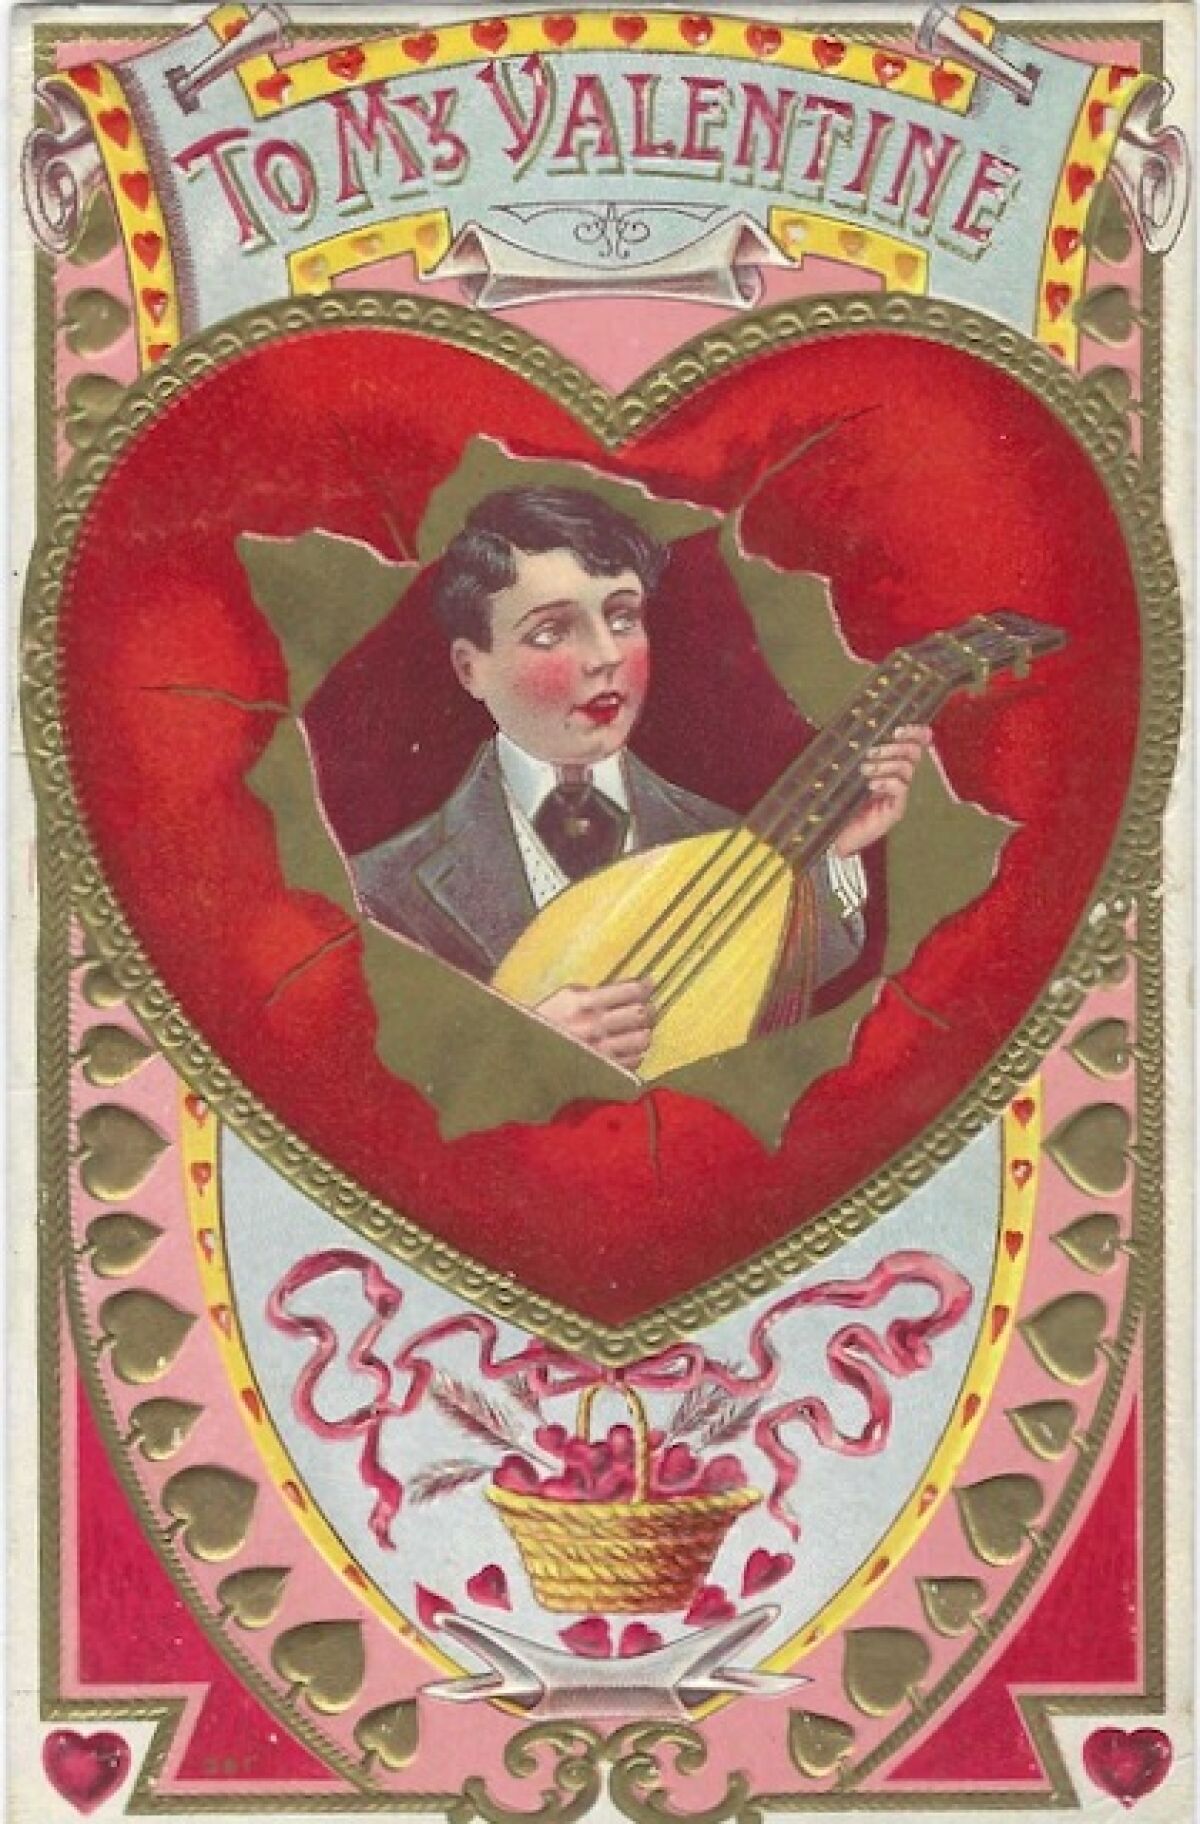 A man with a lute is depicted inside a red heart.